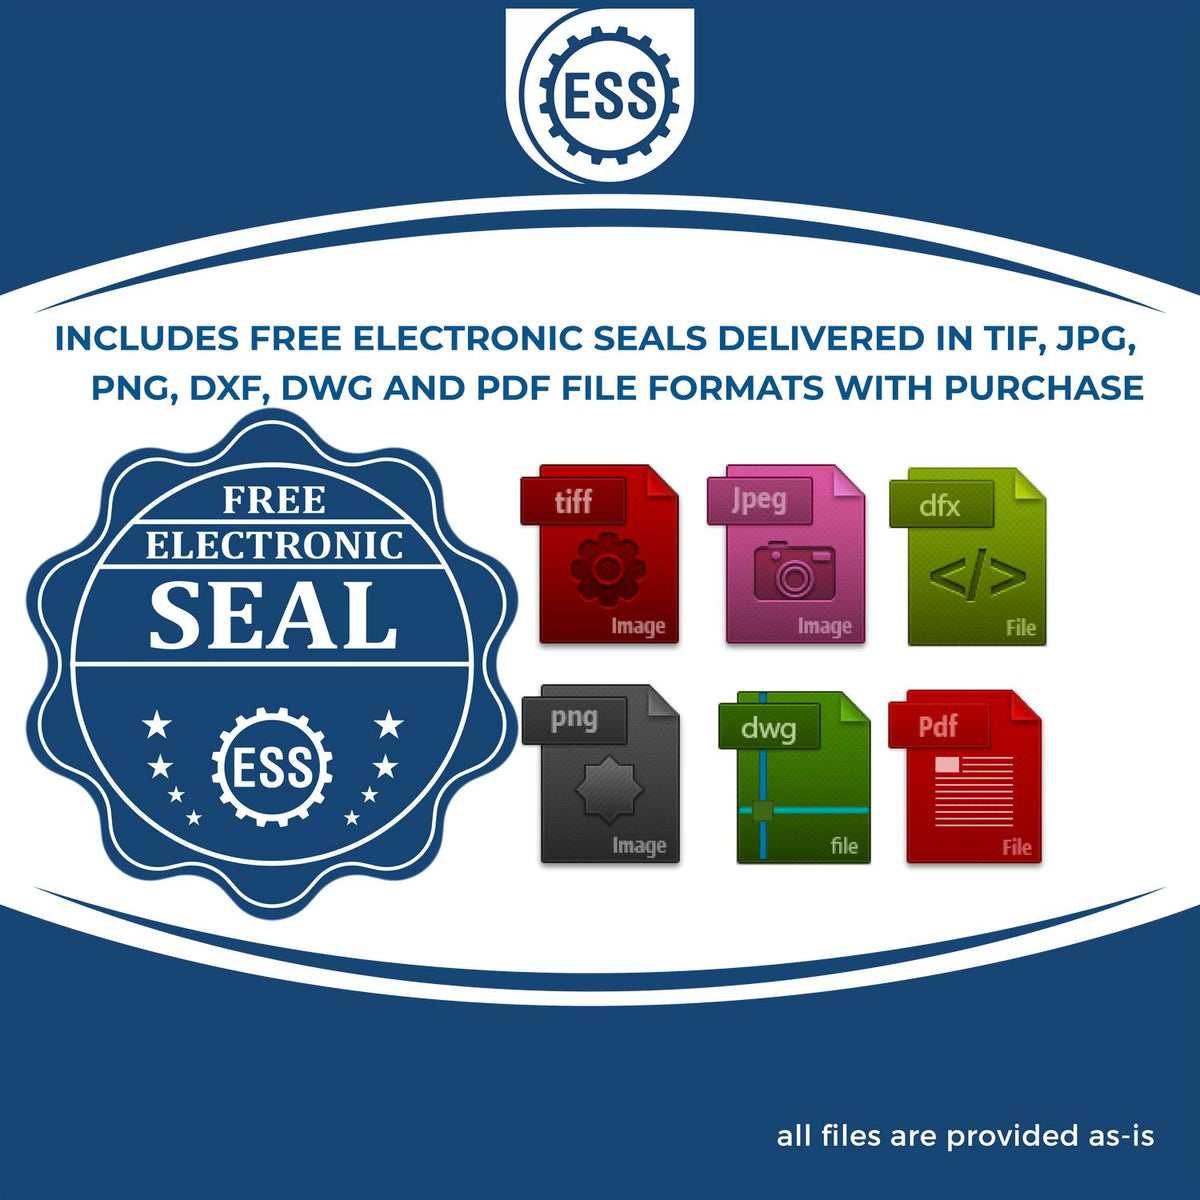 An infographic for the free electronic seal for the Gift District of Columbia Engineer Seal illustrating the different file type icons such as DXF, DWG, TIF, JPG and PNG.